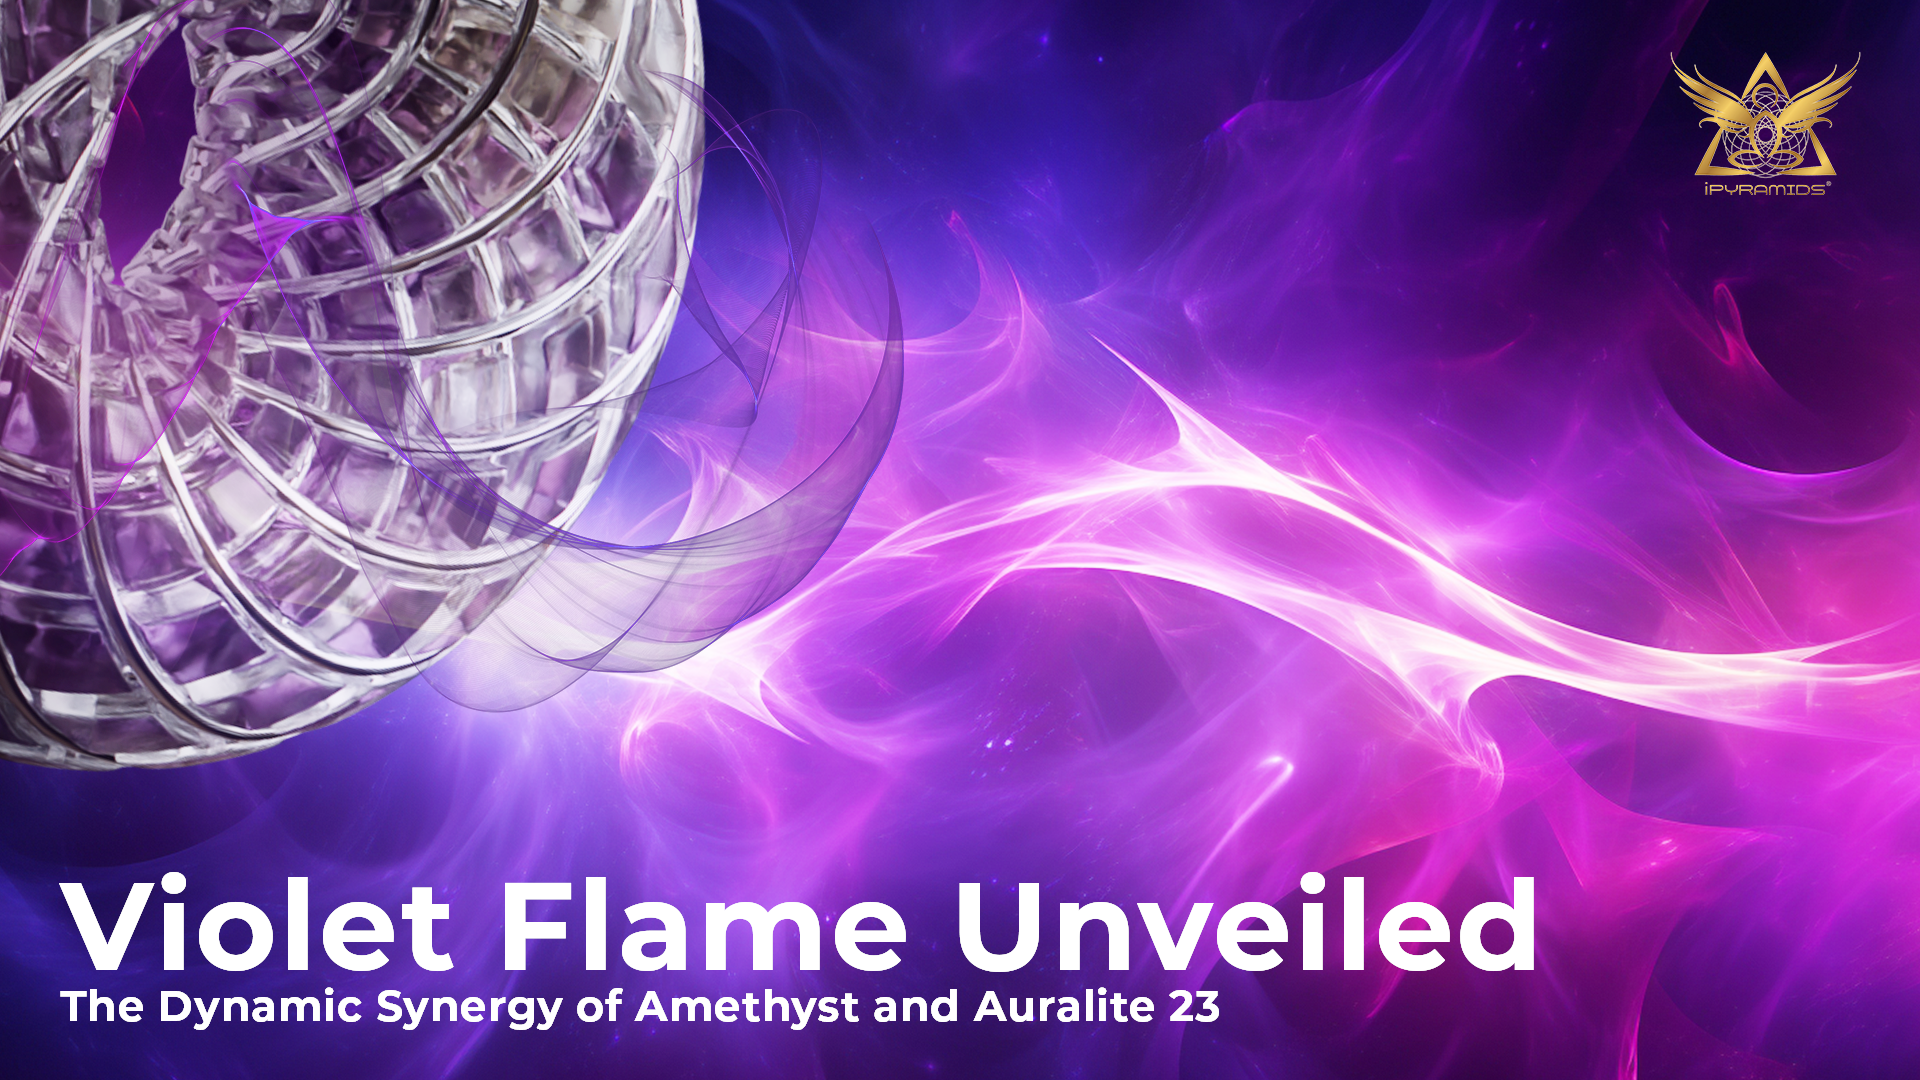 Violet Flame Unveiled: The Dynamic Synergy of Amethyst and Auralite 23